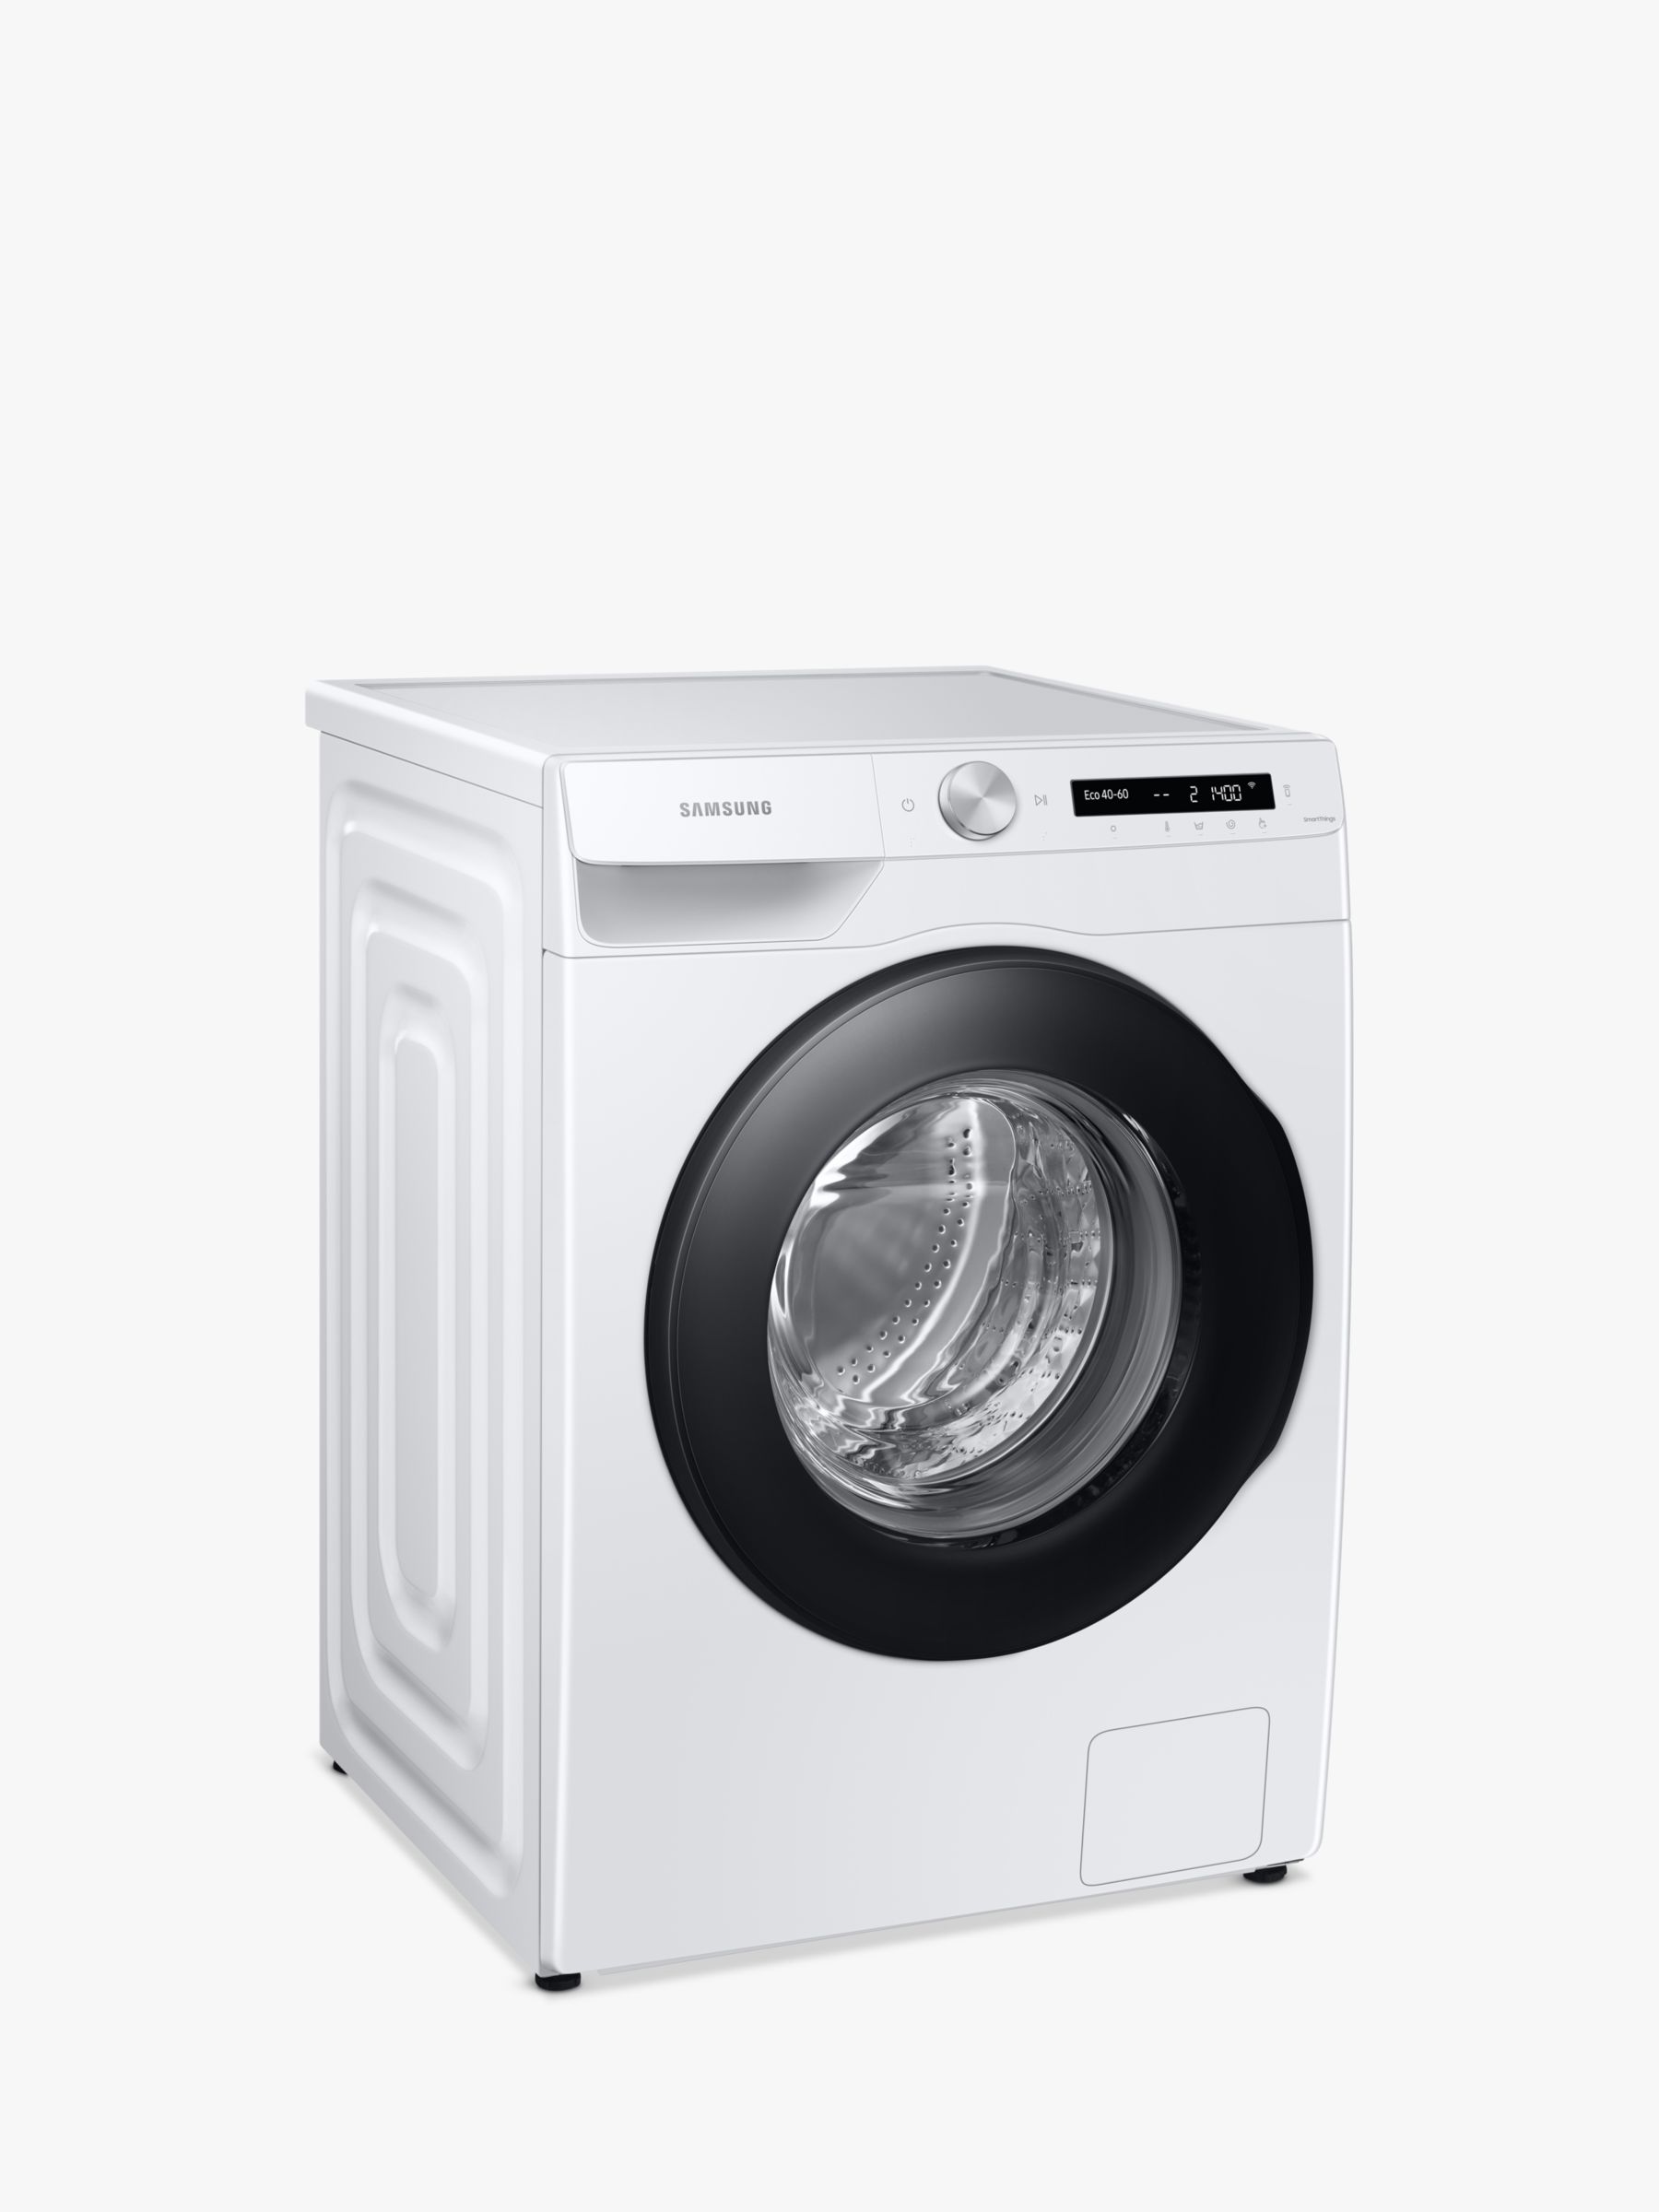 5+ Fantastic Methods to Clean a Smelly Front Load Washer in 2023